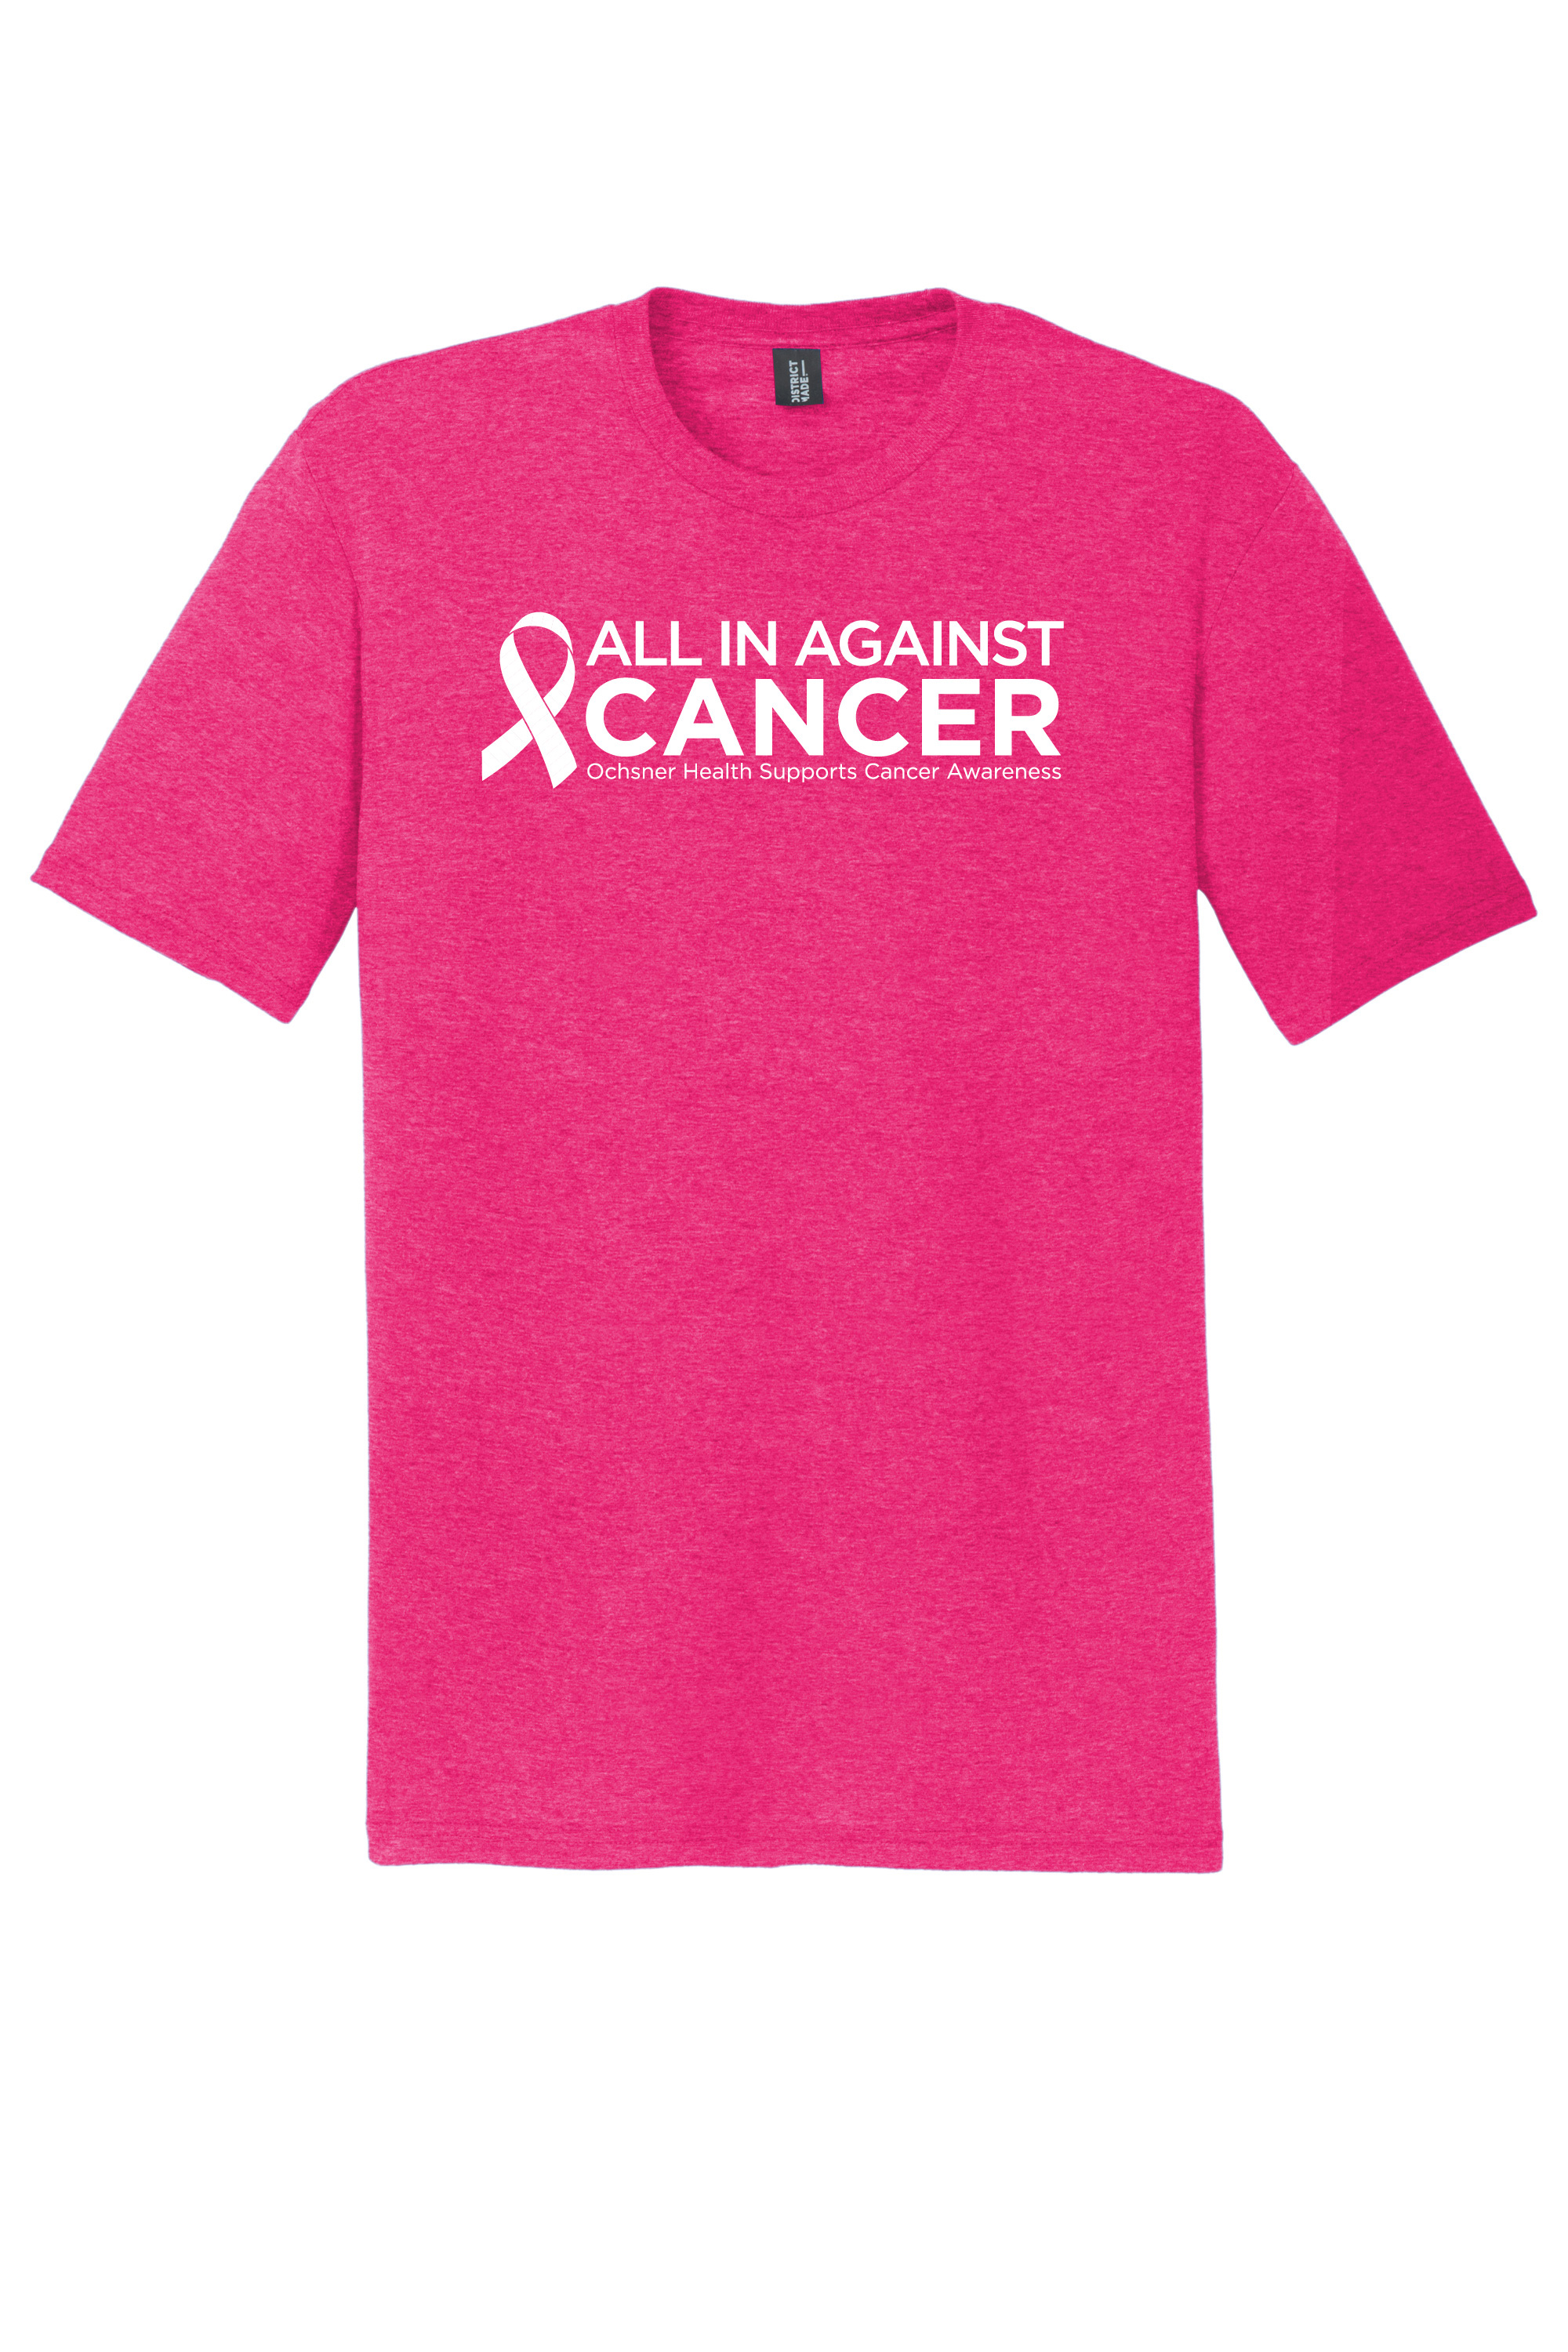 All in Against Cancer Unisex T-Shirt, Pink, large image number 1